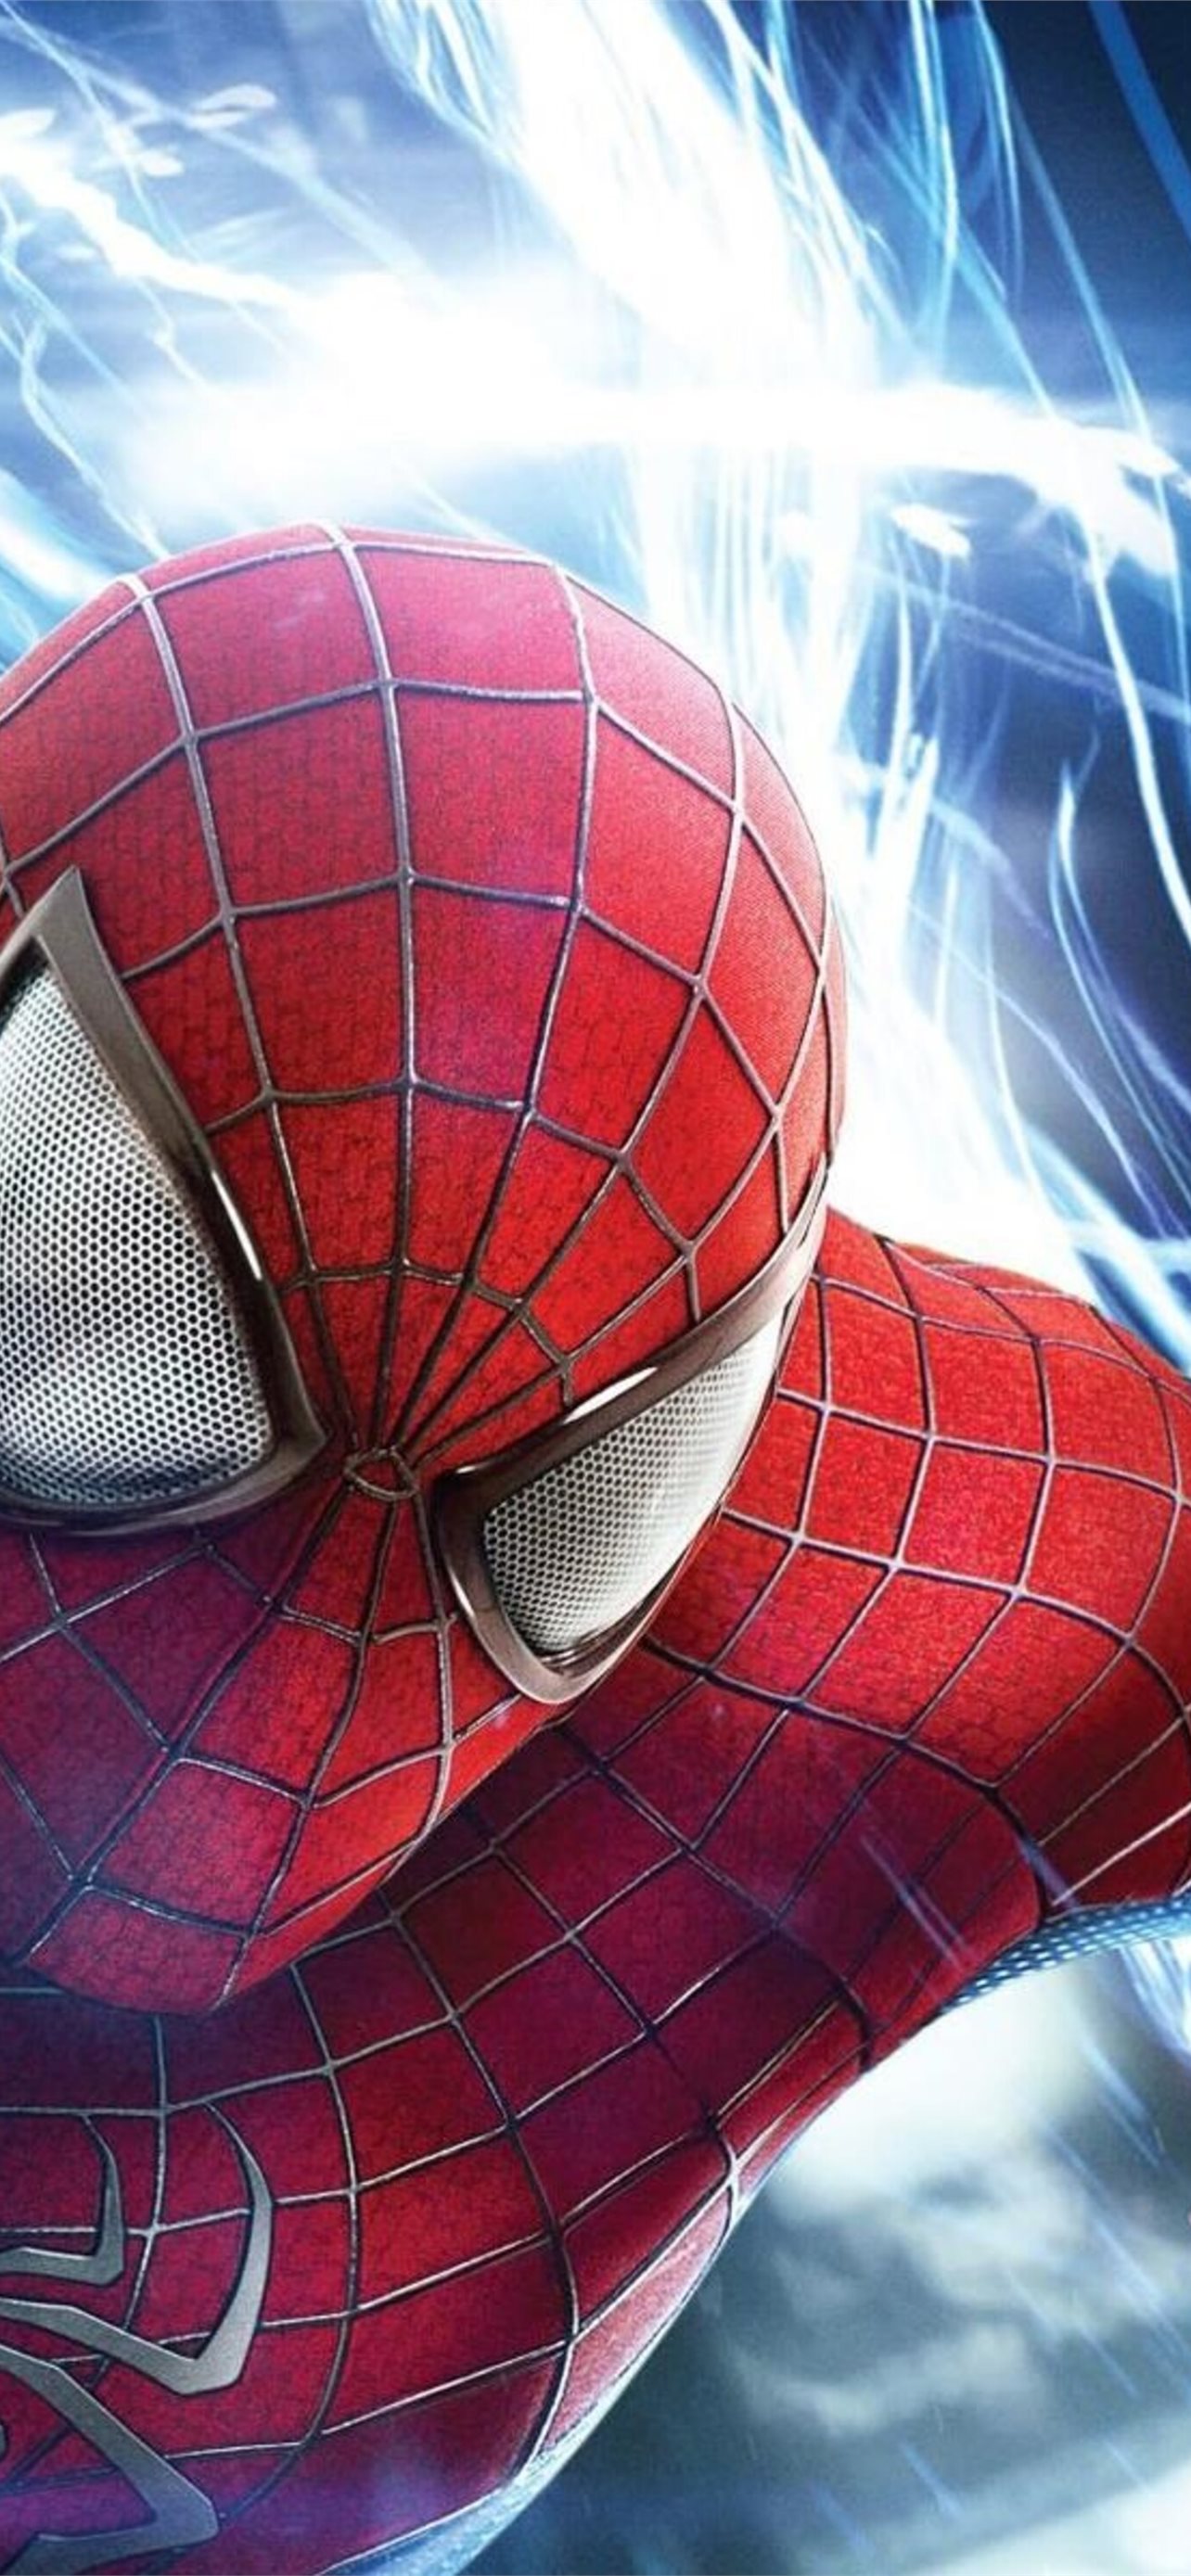 The Amazing Spider Man 2 Movie Samsung Galaxy Note... iPhone Wallpapers  Free Download